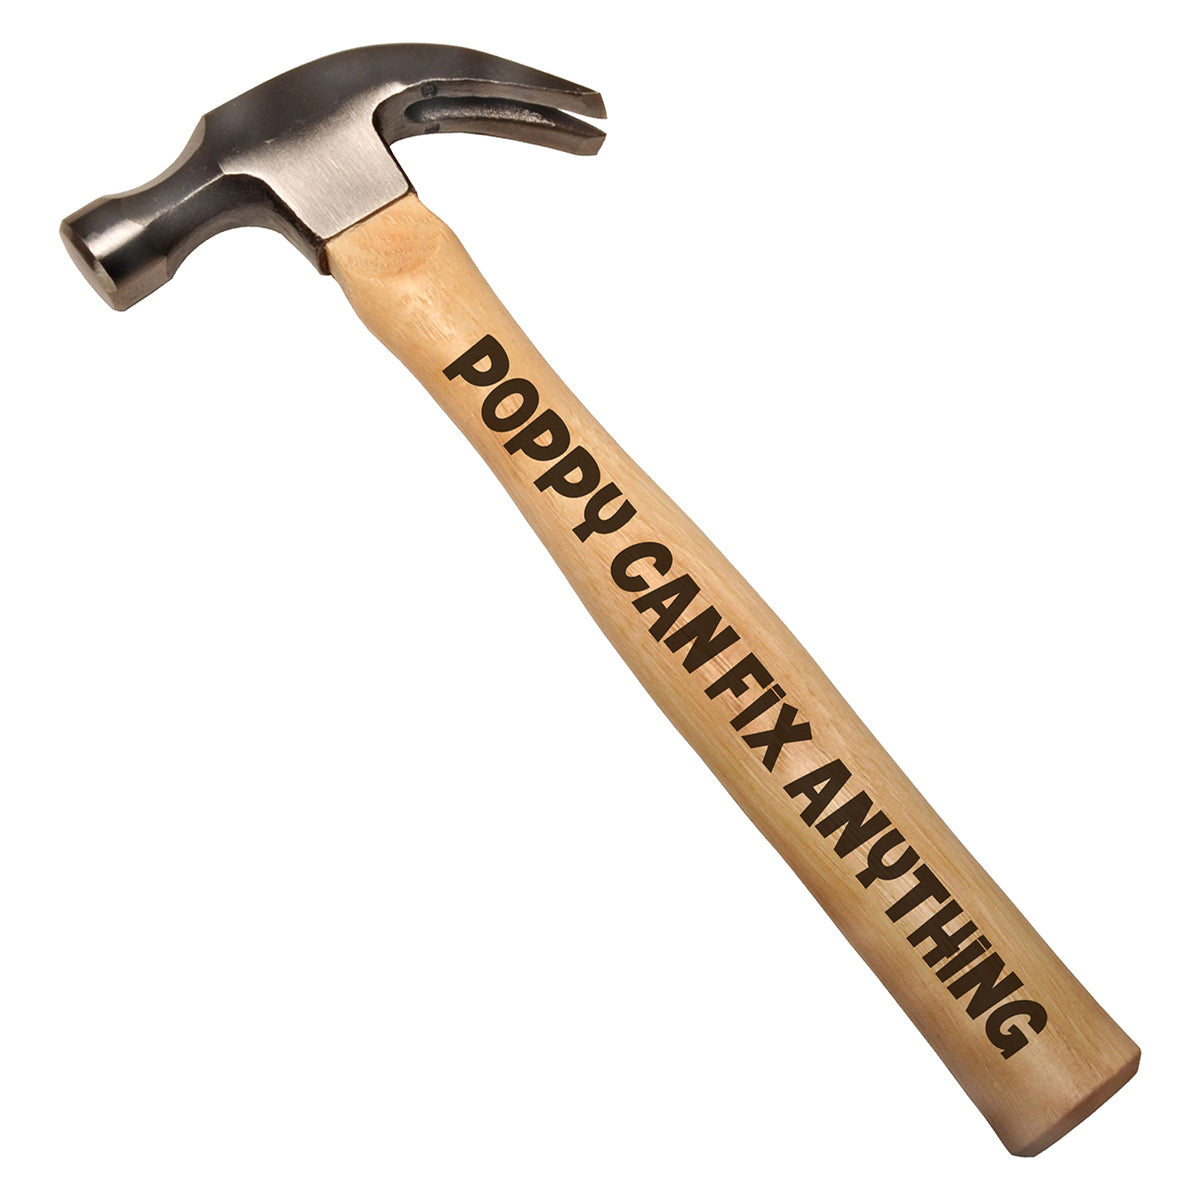 Poppy Can Fix Anything DIY Gift Engraved Wood Handle Steel Hammer